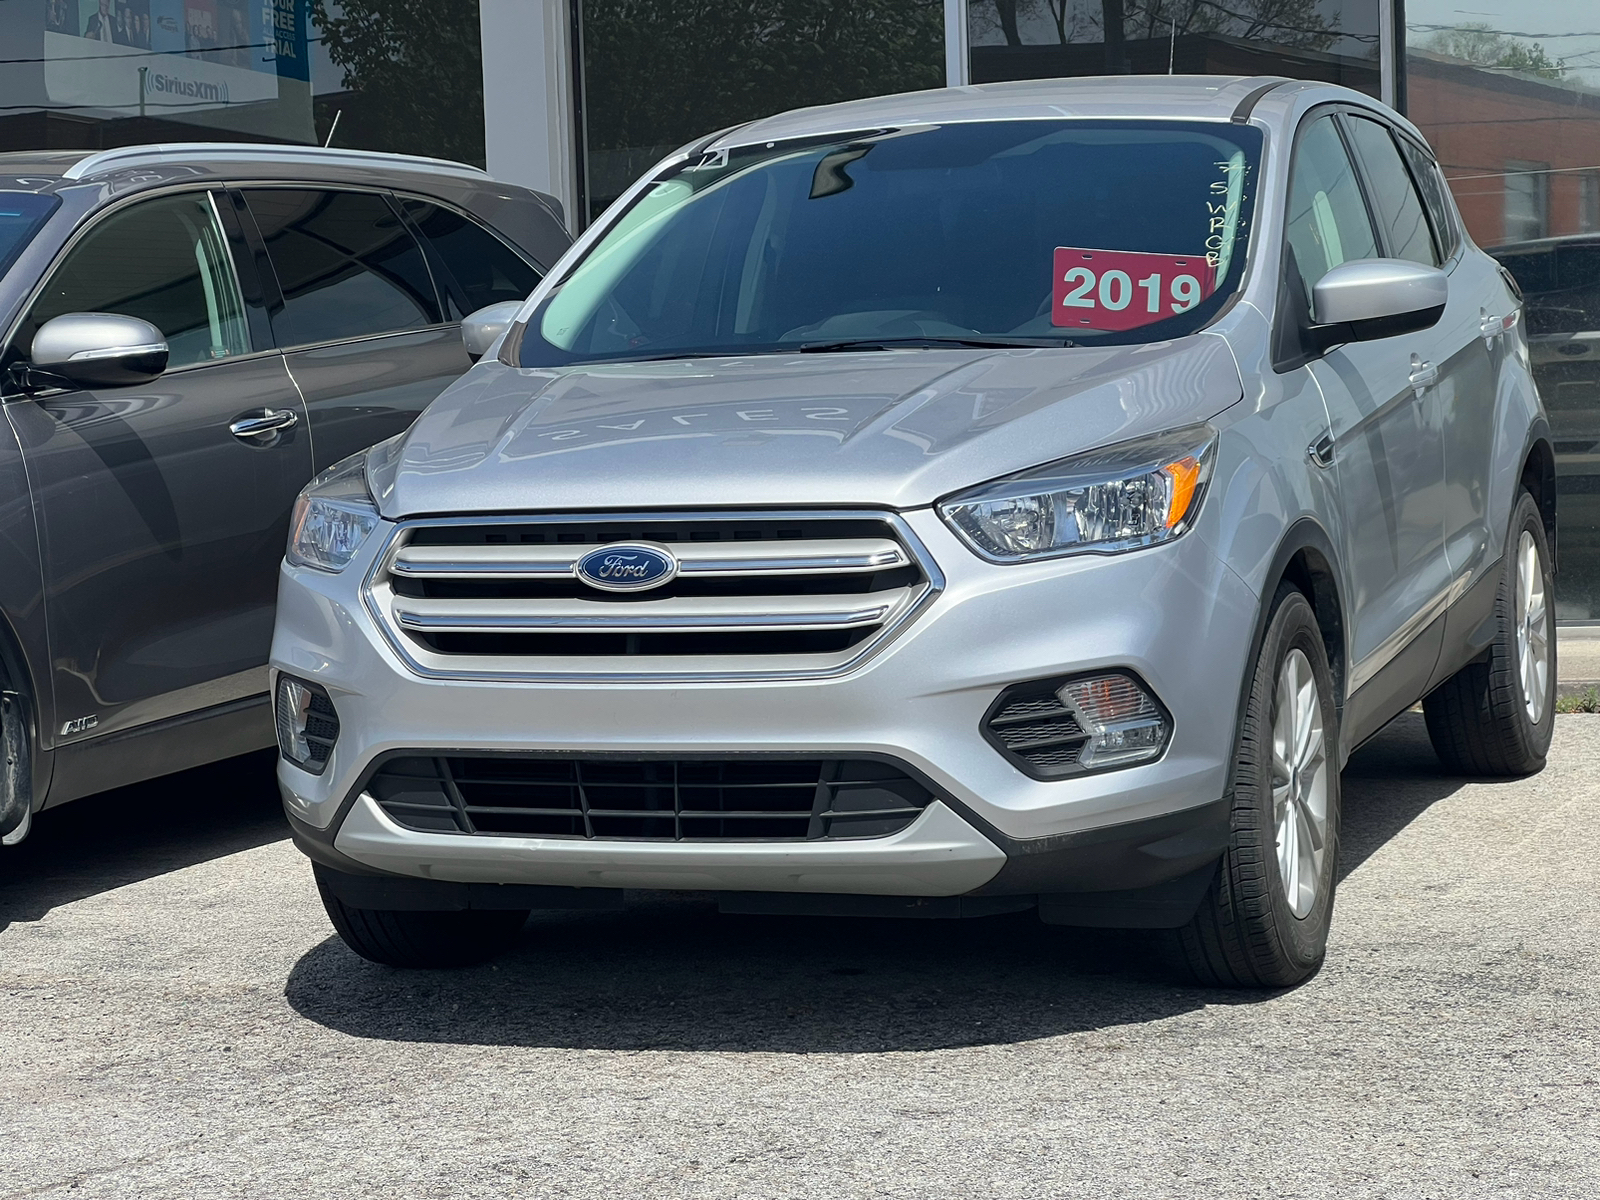 2019 Ford Escape SE - 4WD - No Accidents - Certified